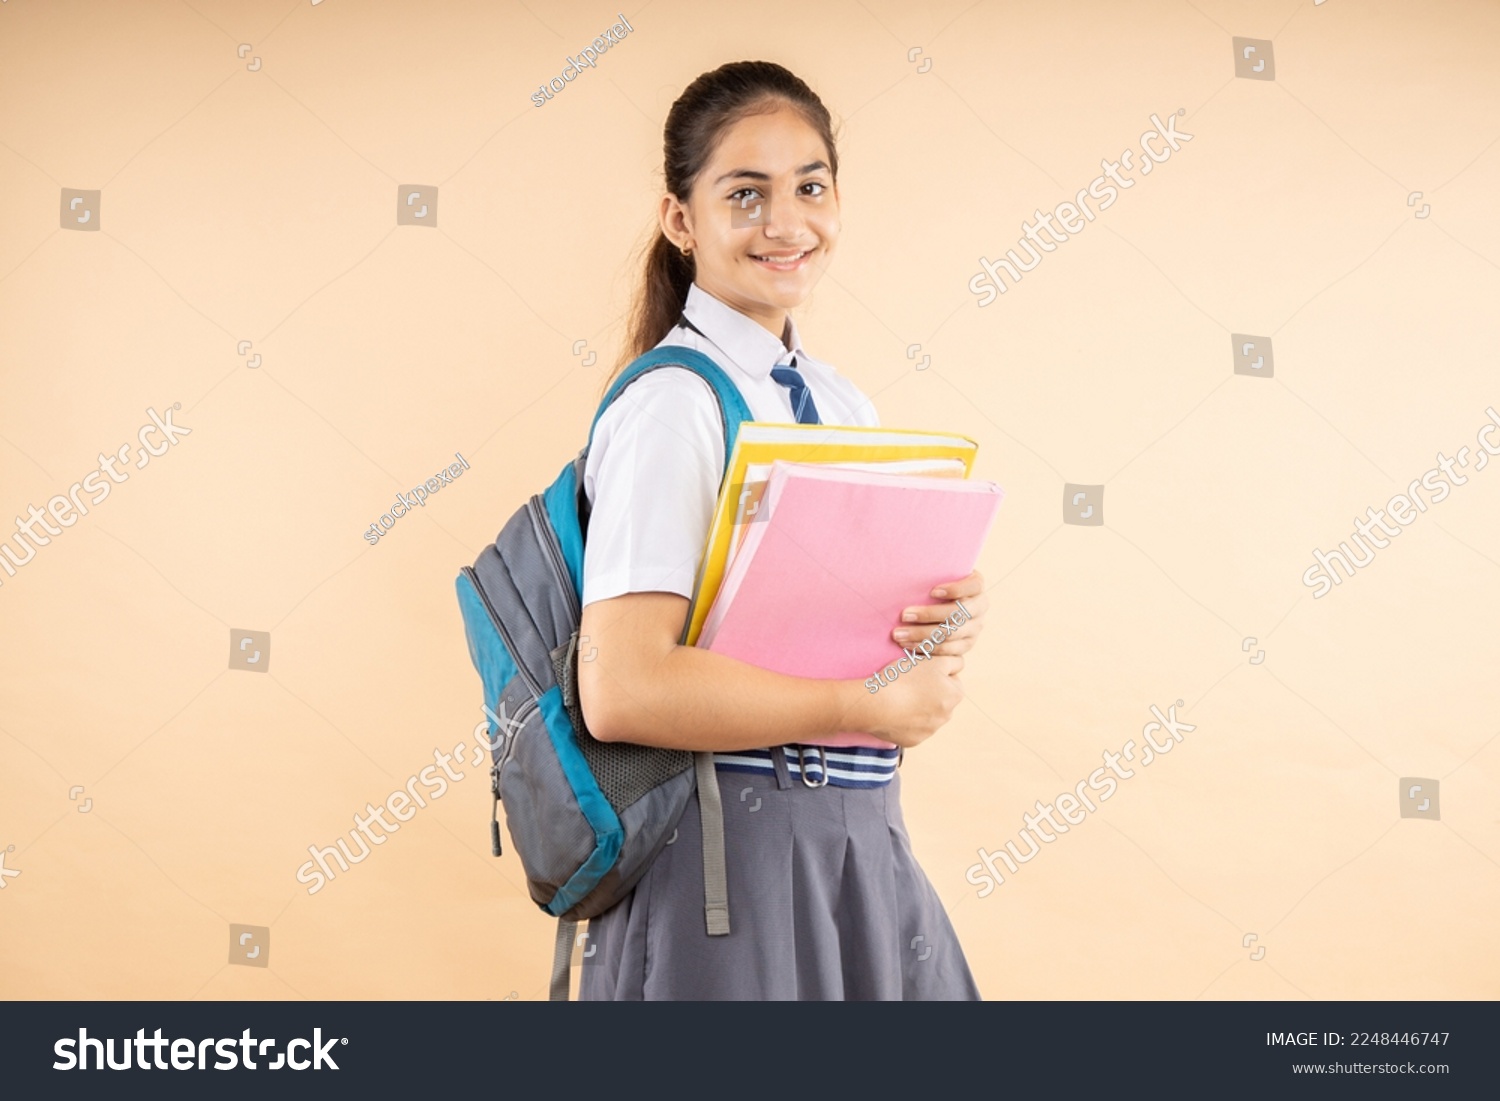 Happy Indian student modern schoolgirl wearing school uniform holding books and bag standing isolated over beige background, Studio shot, Education concept. #2248446747